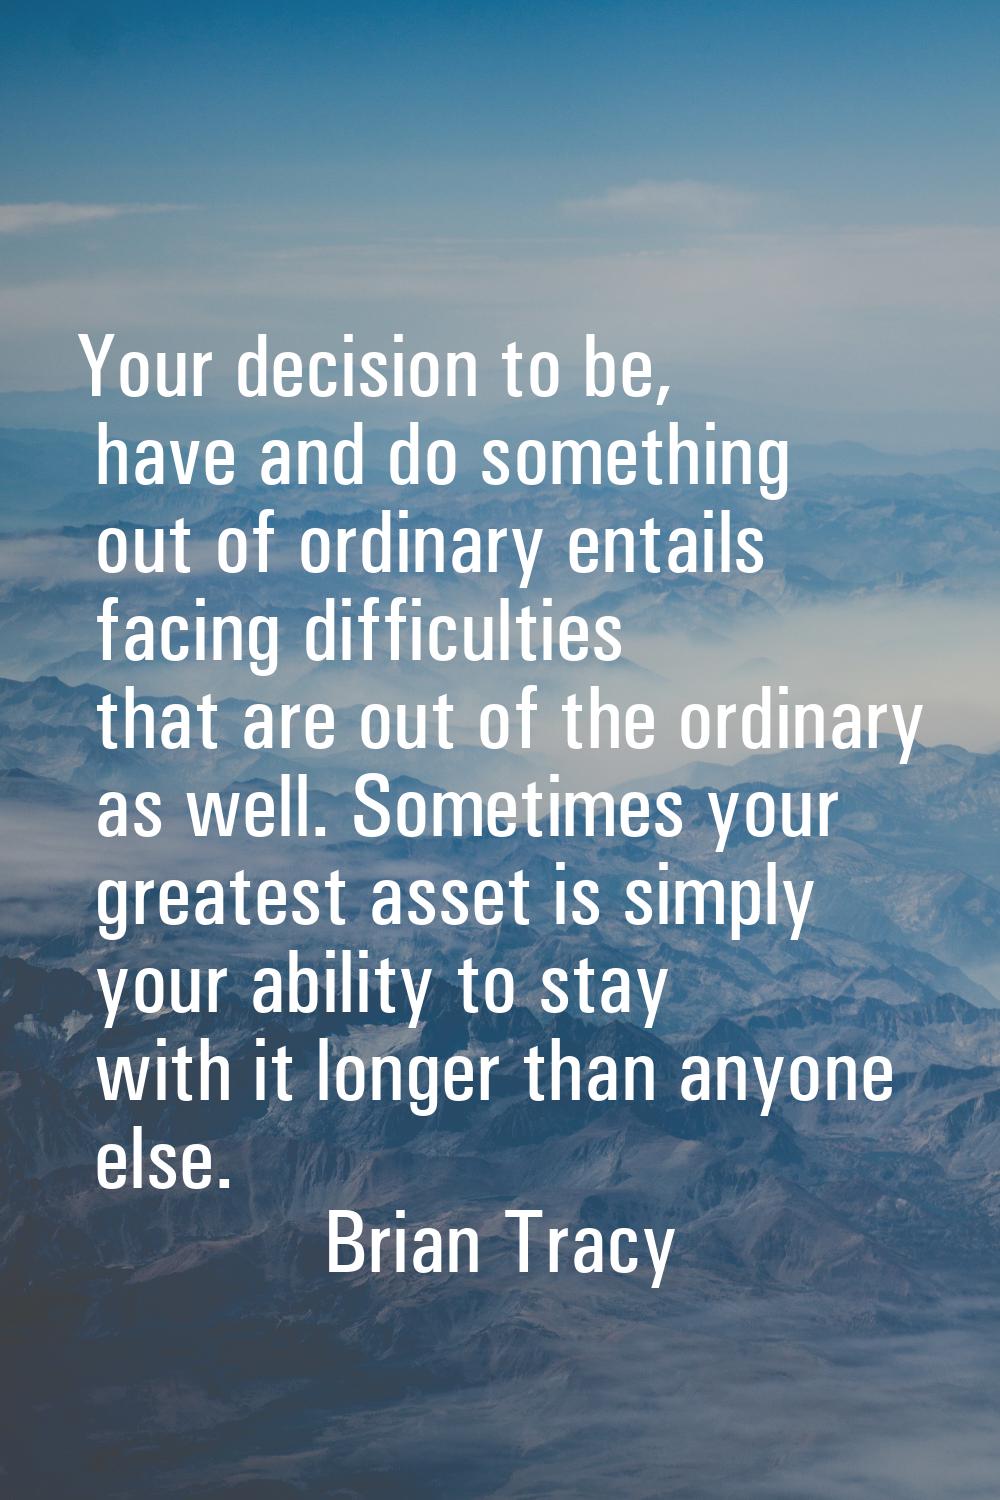 Your decision to be, have and do something out of ordinary entails facing difficulties that are out